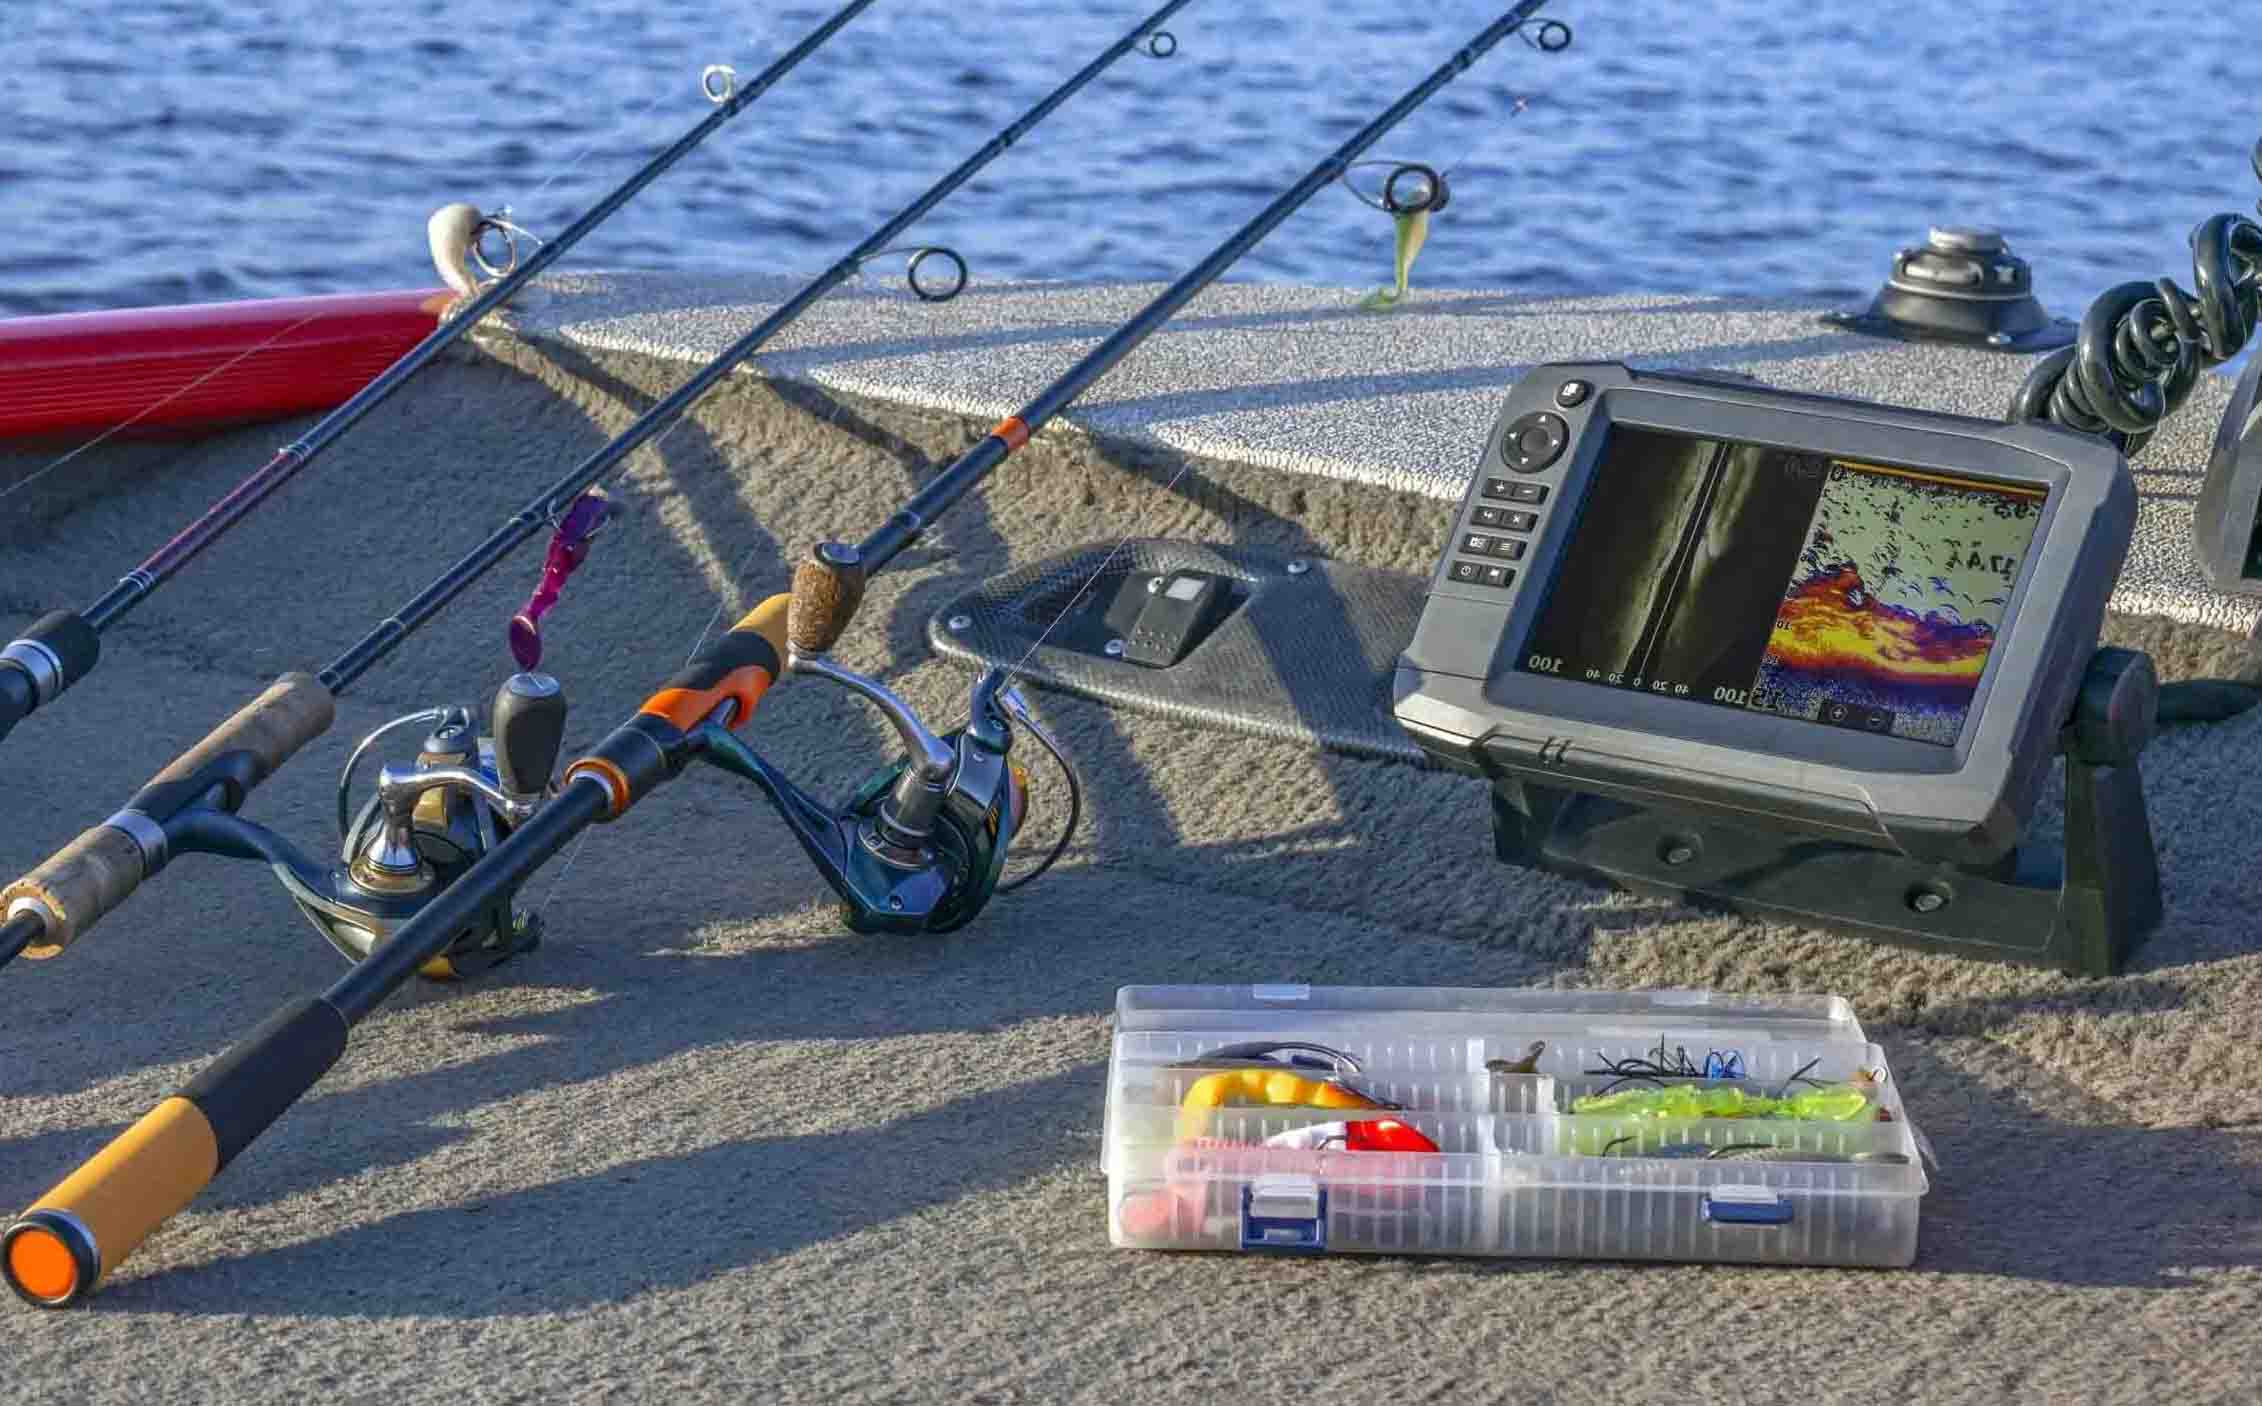 Spinning fishing rods with reels, lures, and a fish finder.